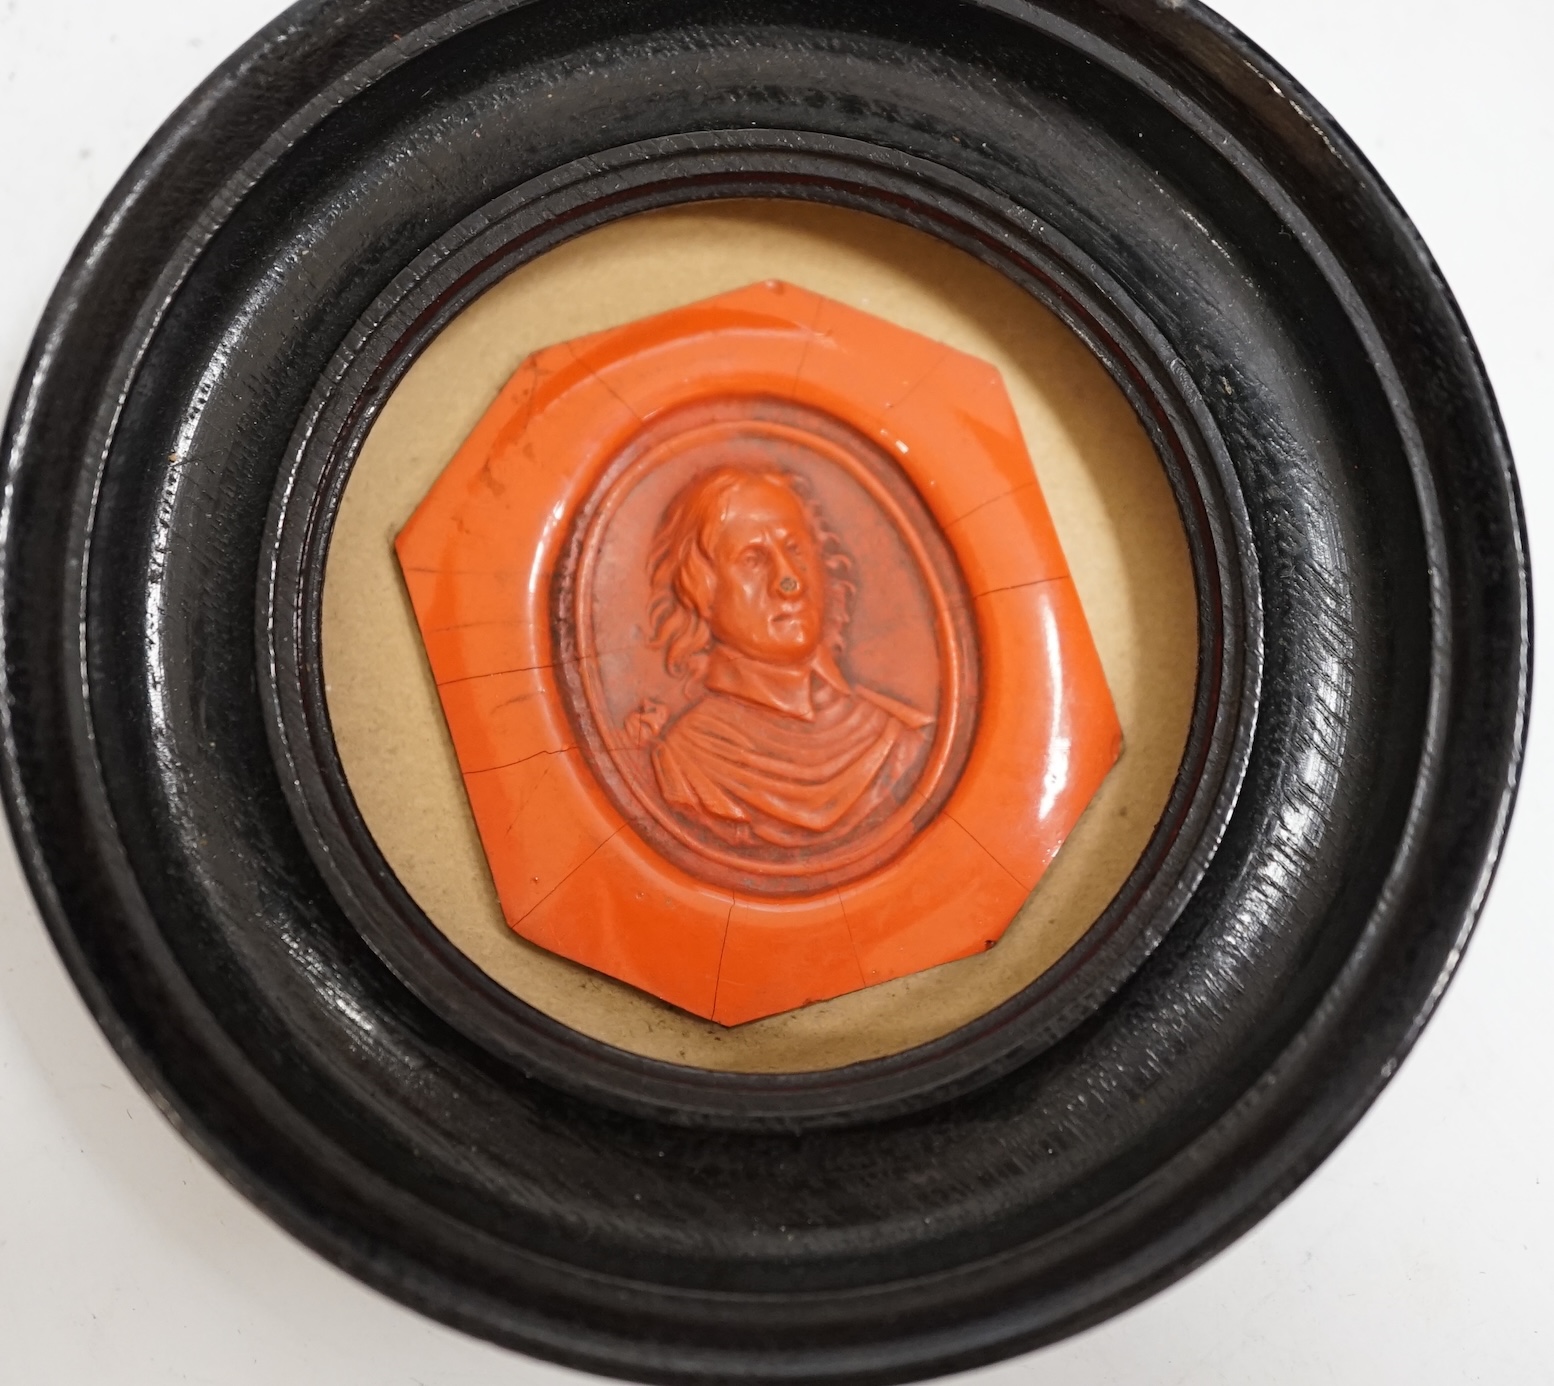 A framed red wax portrait of Oliver Cromwell, label verso reads ‘Oliver Cromwell the founder of English Liberty born 1599 died 1658 Emilie J. Bosignieu? 19-/68?’, 8.5cm diameter. Condition - fair